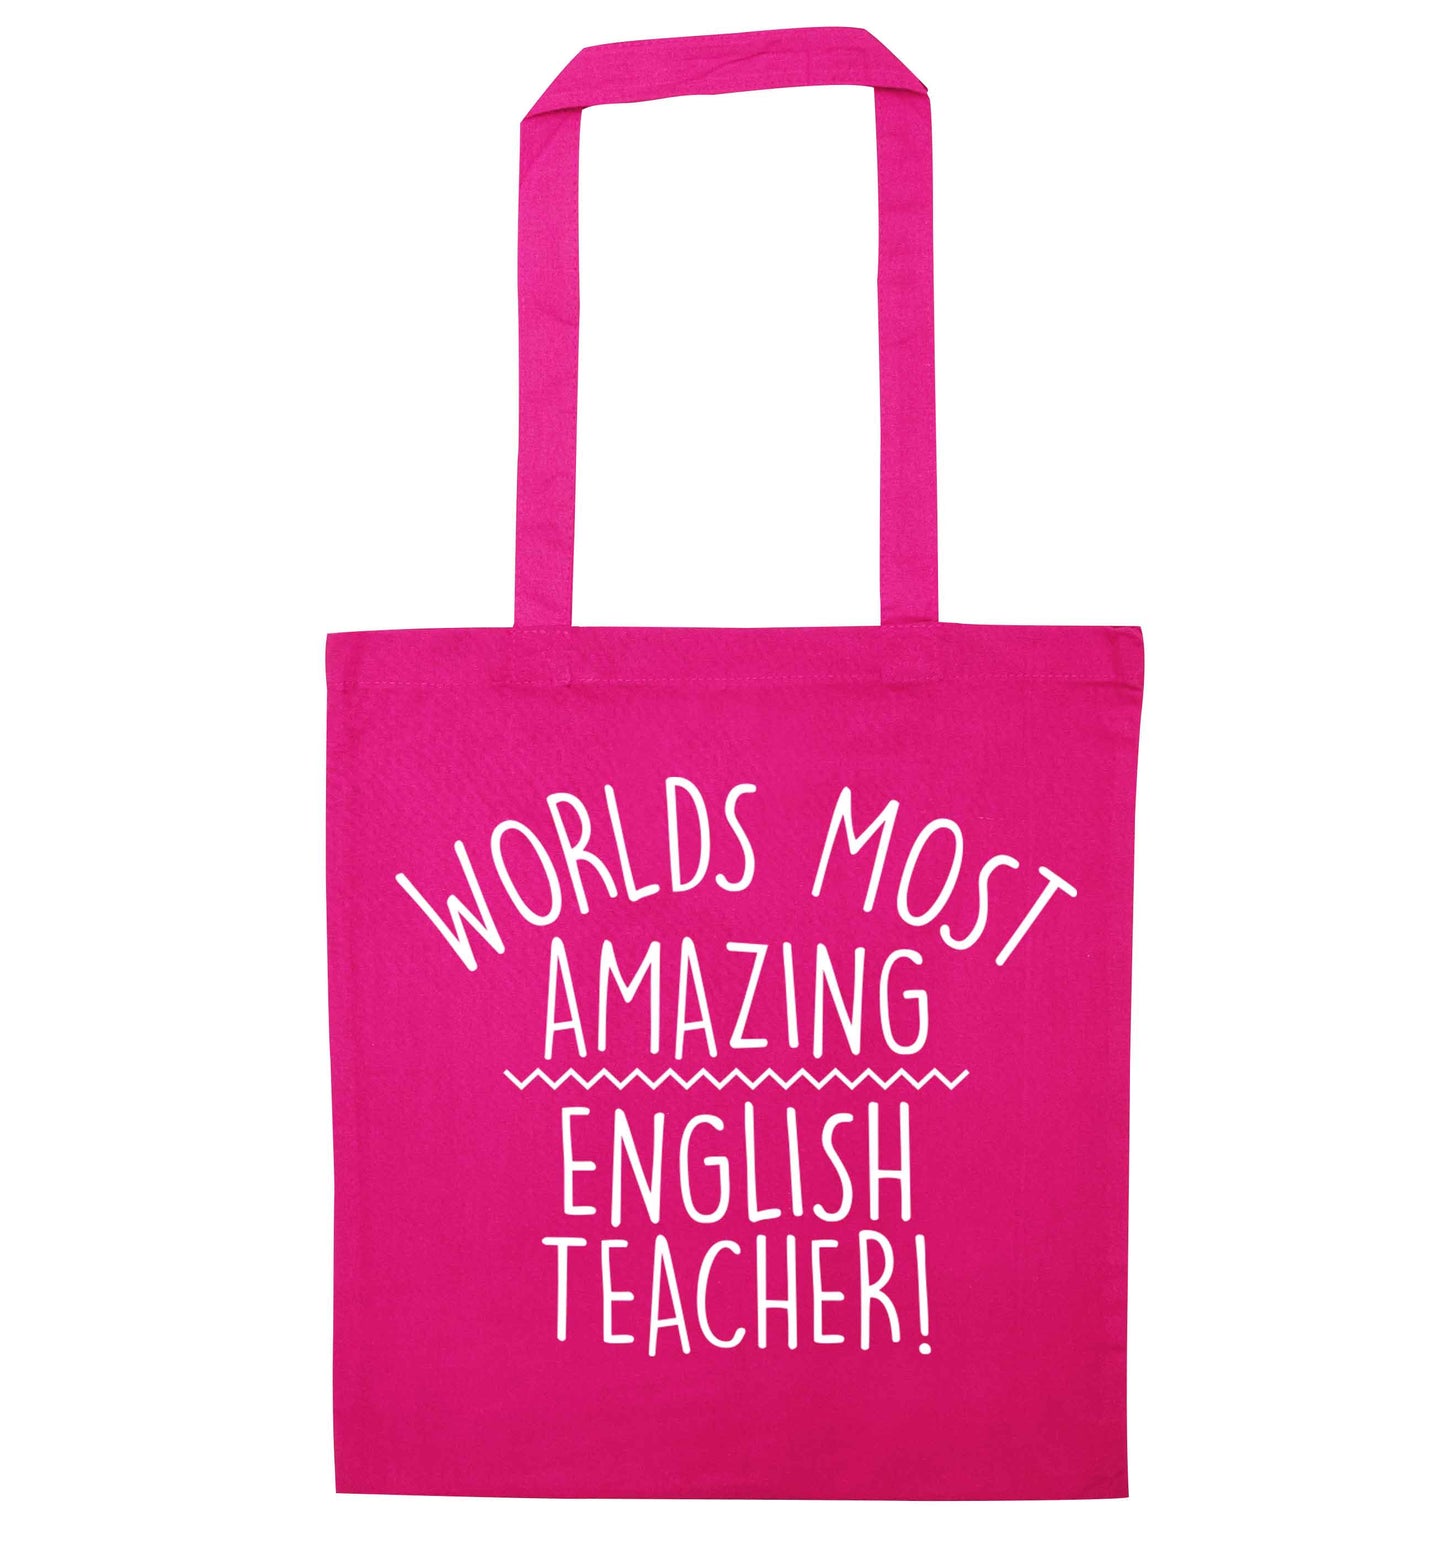 Worlds most amazing English teacher pink tote bag